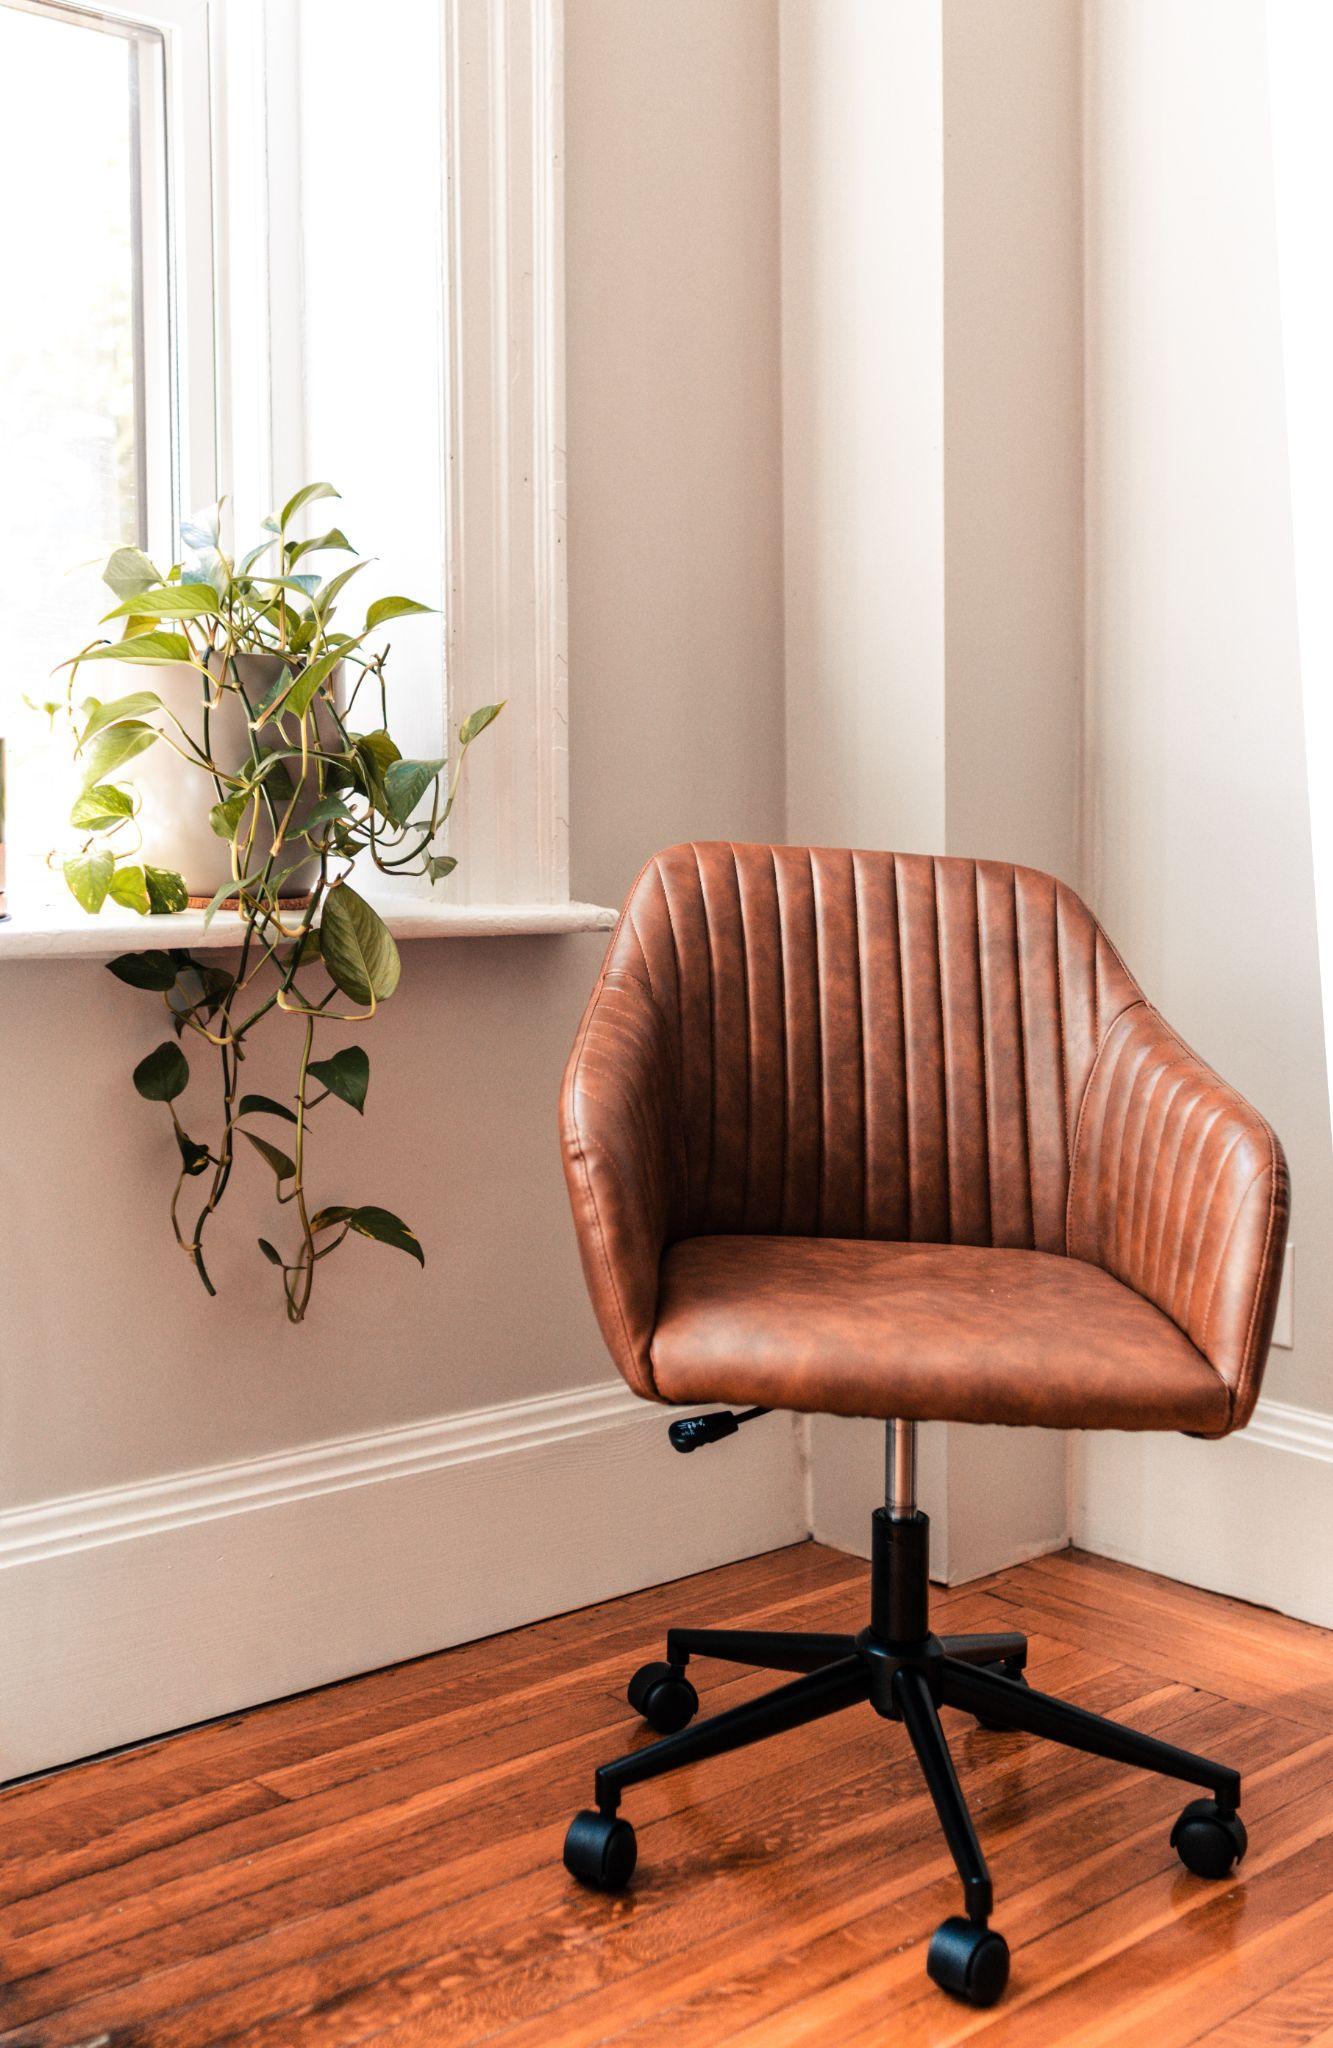 a plant beside windows and a leather chair